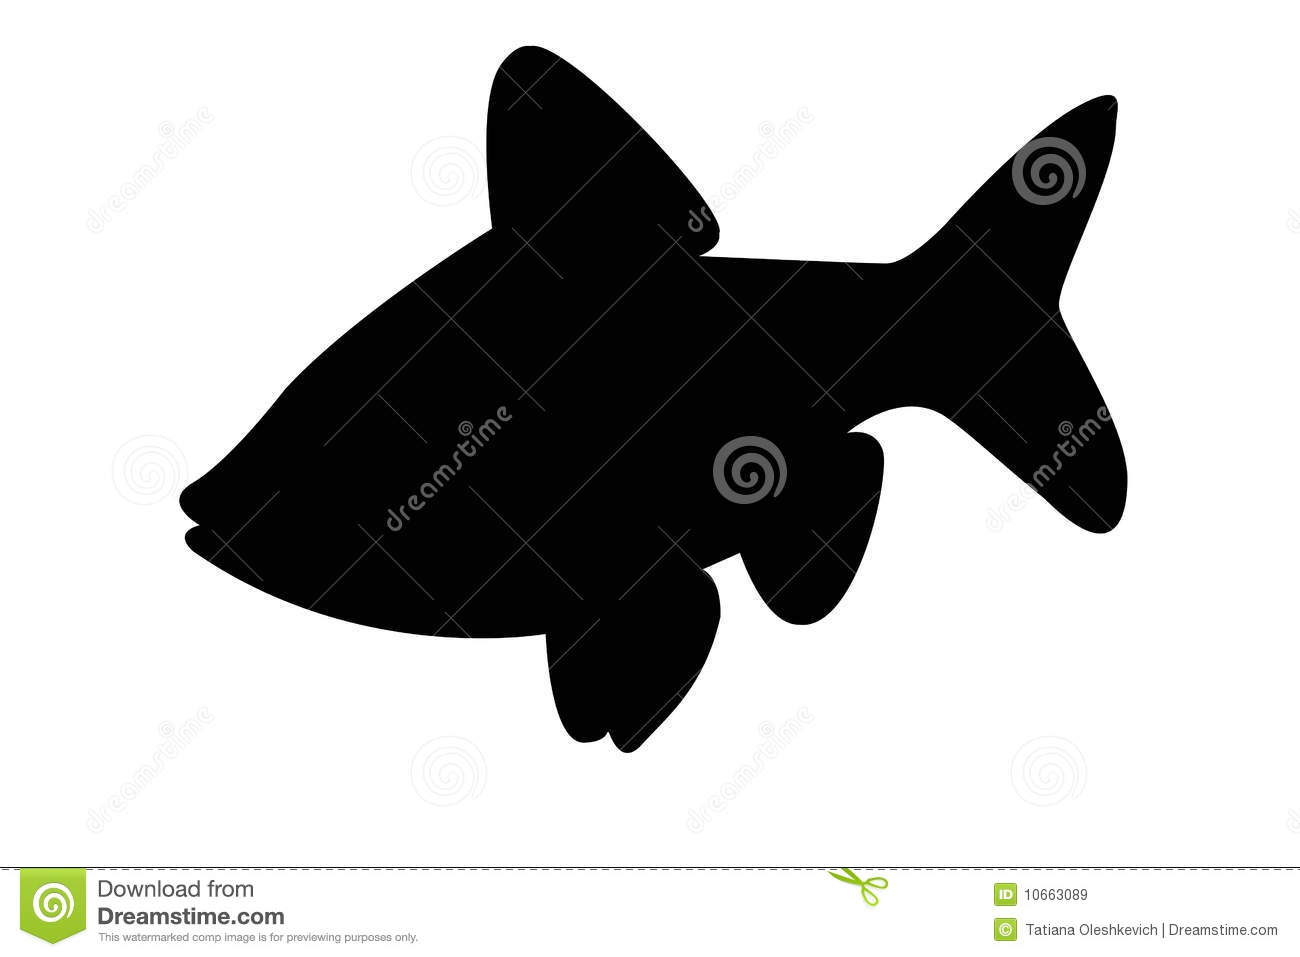 Silhouette Of Crucian Carp Fish Isolate Royalty Free Stock Images